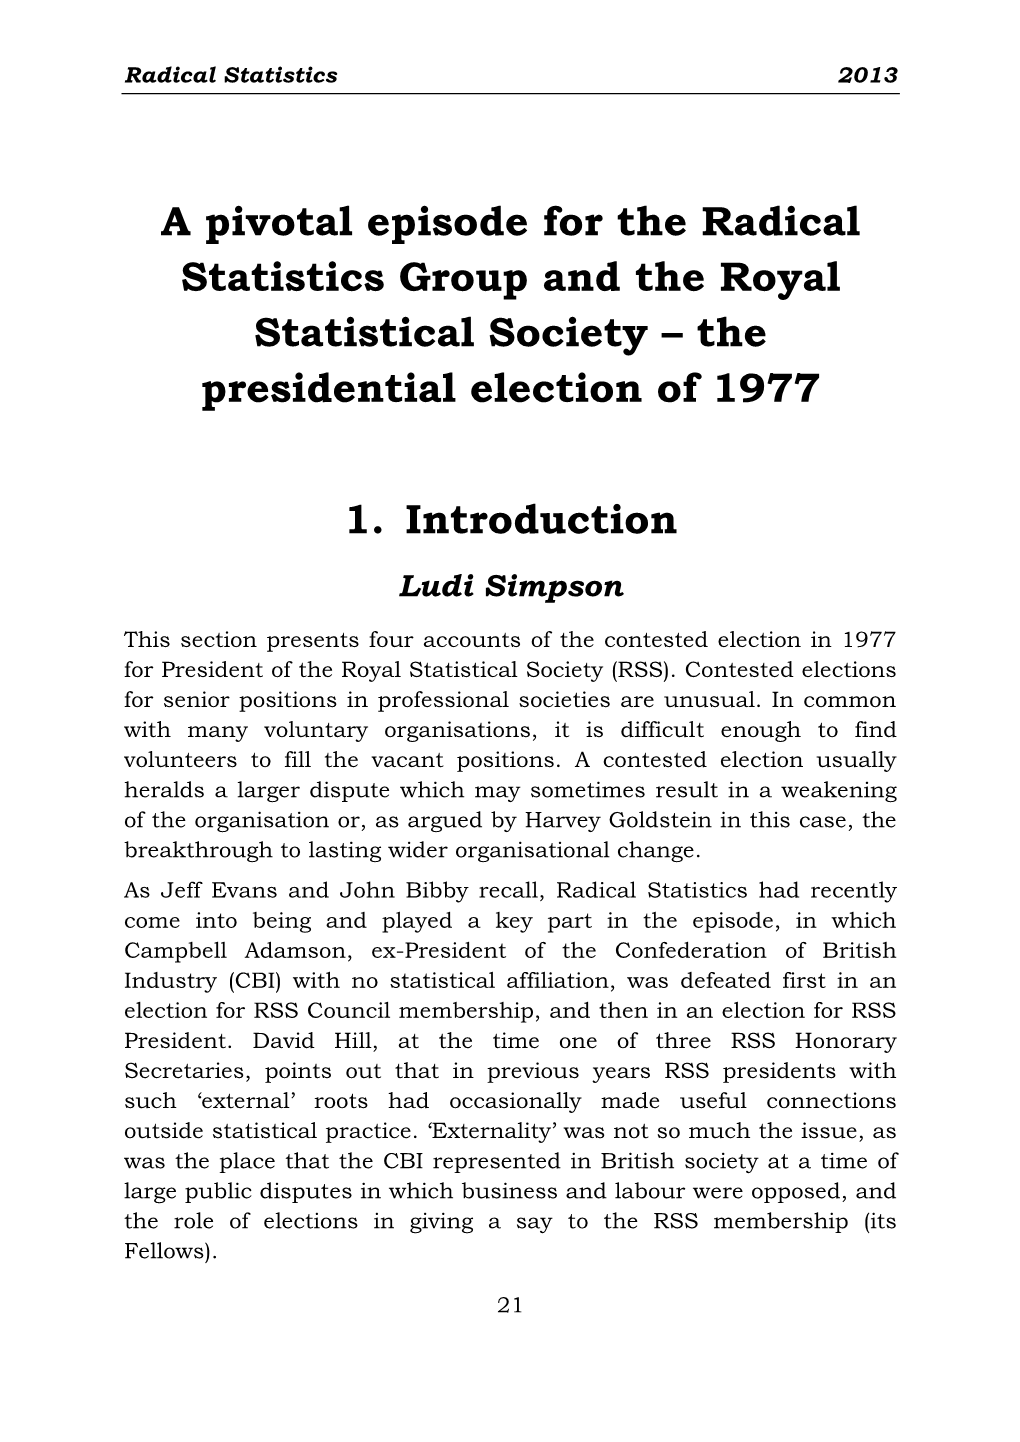 The Radical Statistics Group and the Royal Statistical Society – the Presidential Election of 1977